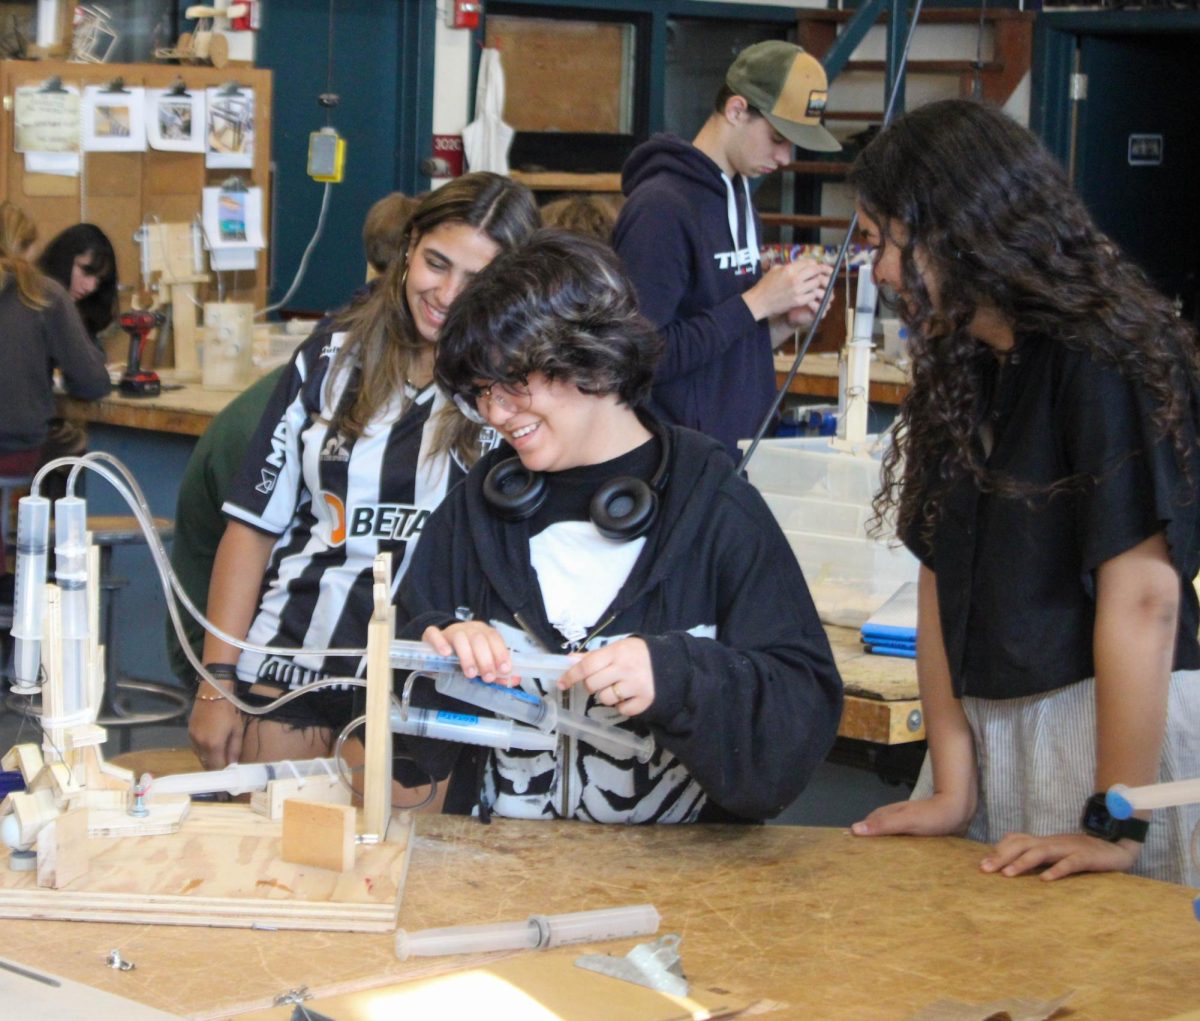 Building engineering projects, students acquire lifelong skills. (Photo Courtesy of 